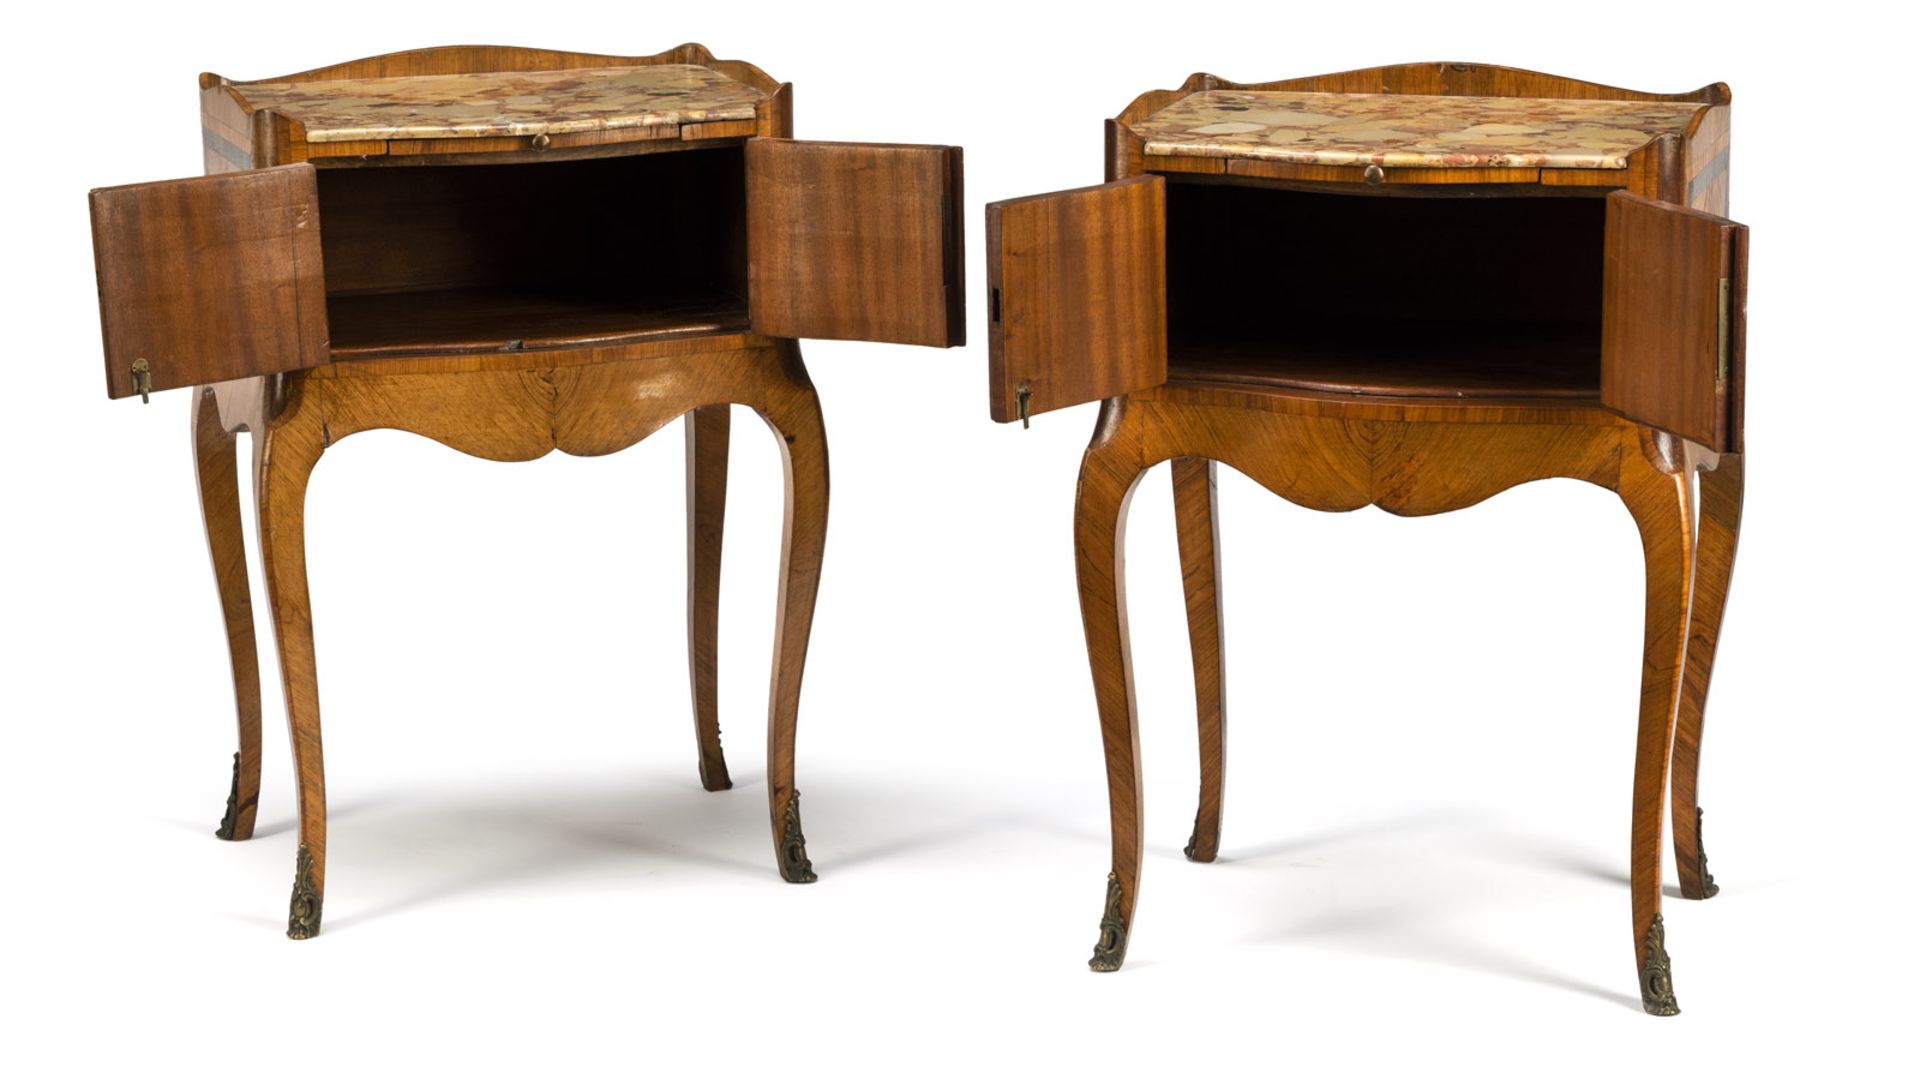 A PAIR OF FRENCH LOUIS-XV-STYLE ORMOLU MOUNTED TULIPWOOD AND AMARANTH OCCATIONAL TABLES - Image 3 of 9